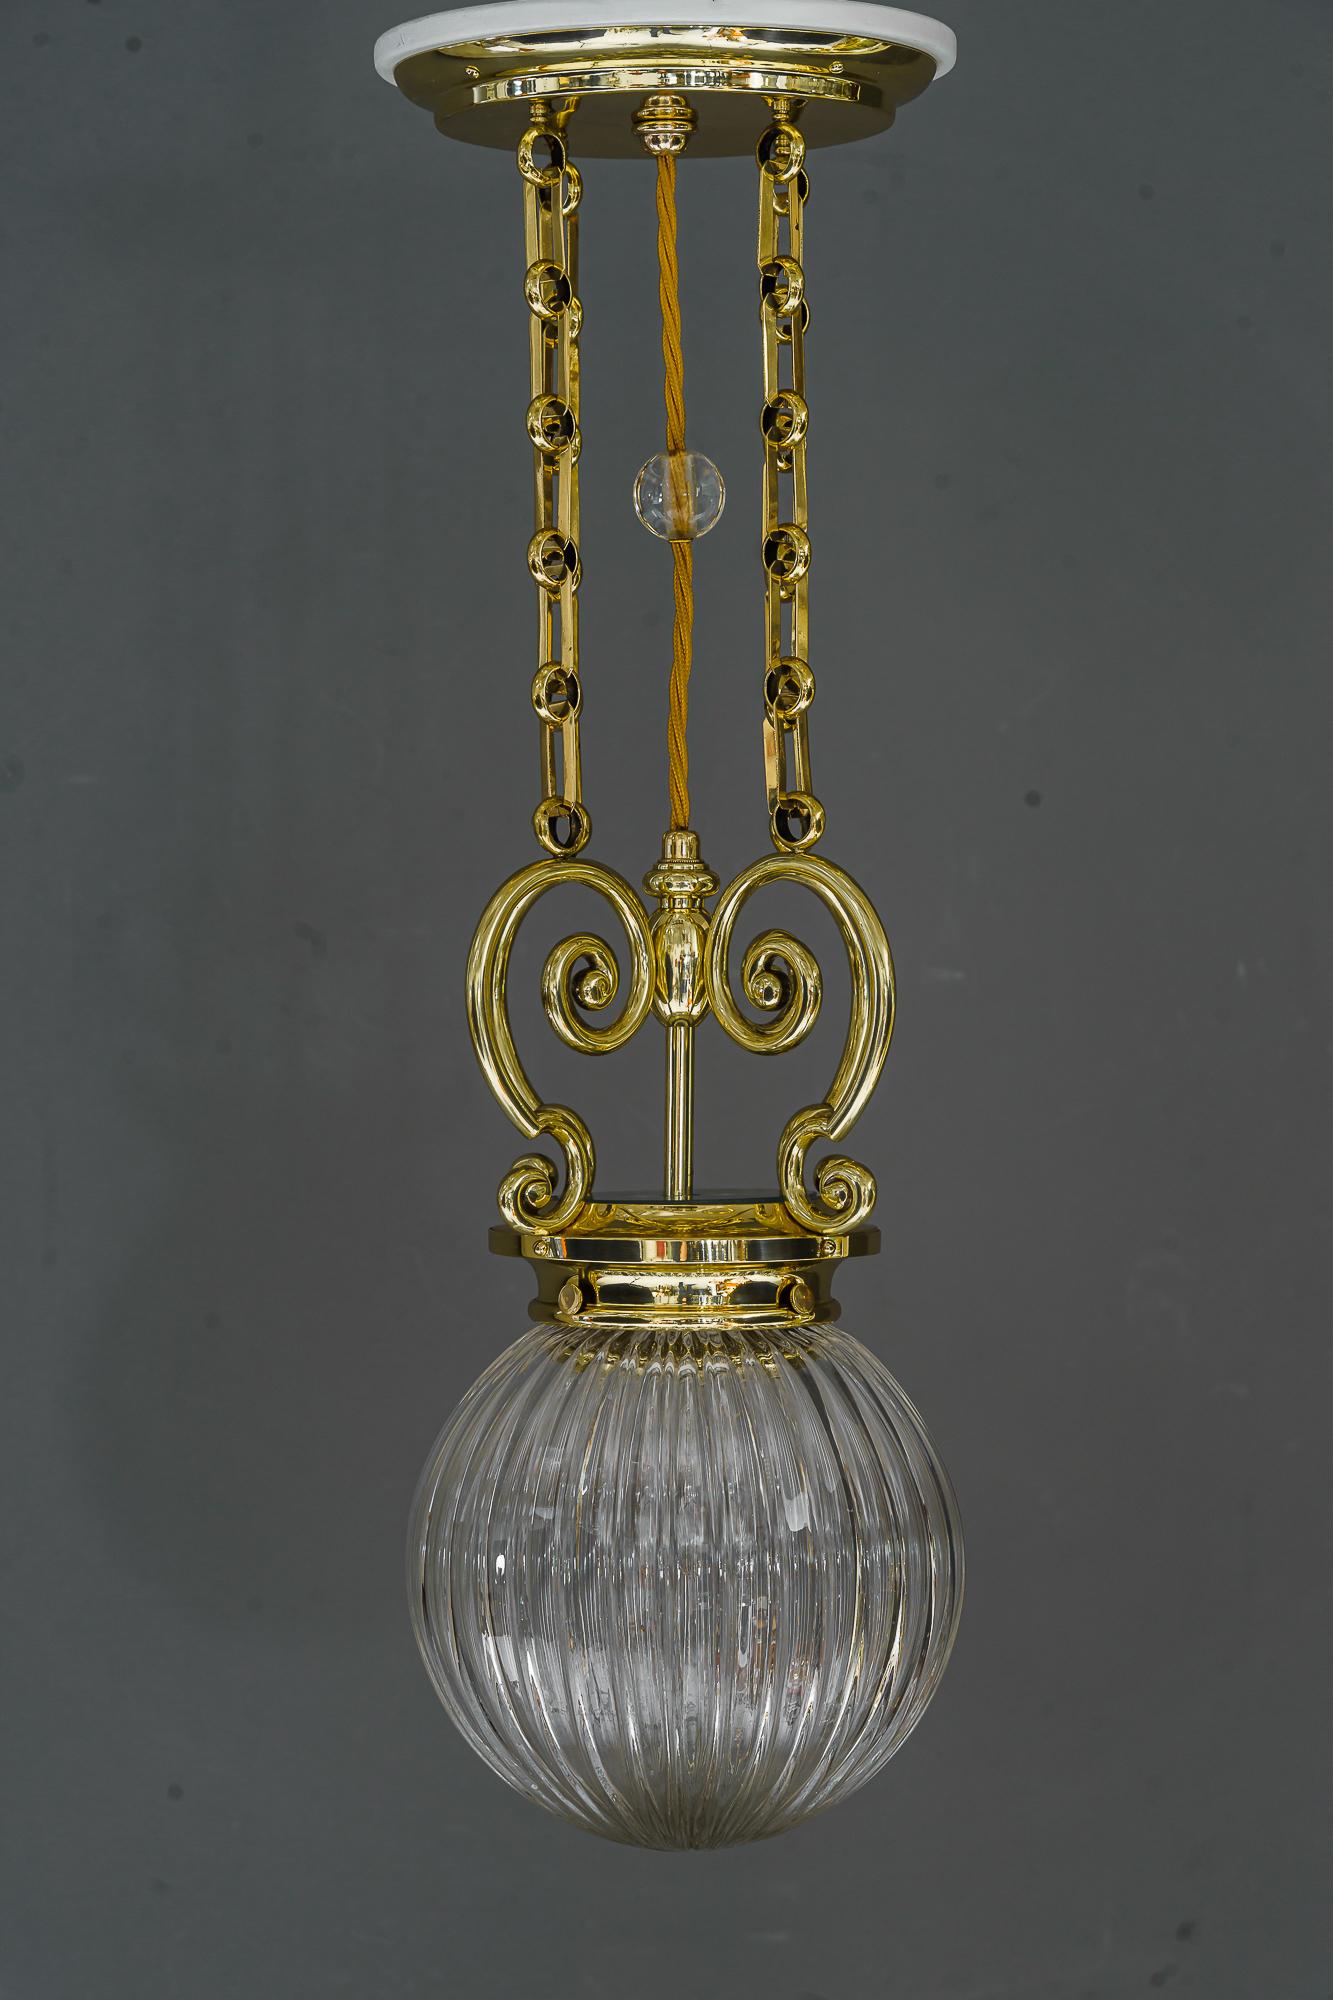 Art Deco pendant vienna around 1920s with original cut glass shade.
Brass polished and stove enameled.
Original cut glass shade.